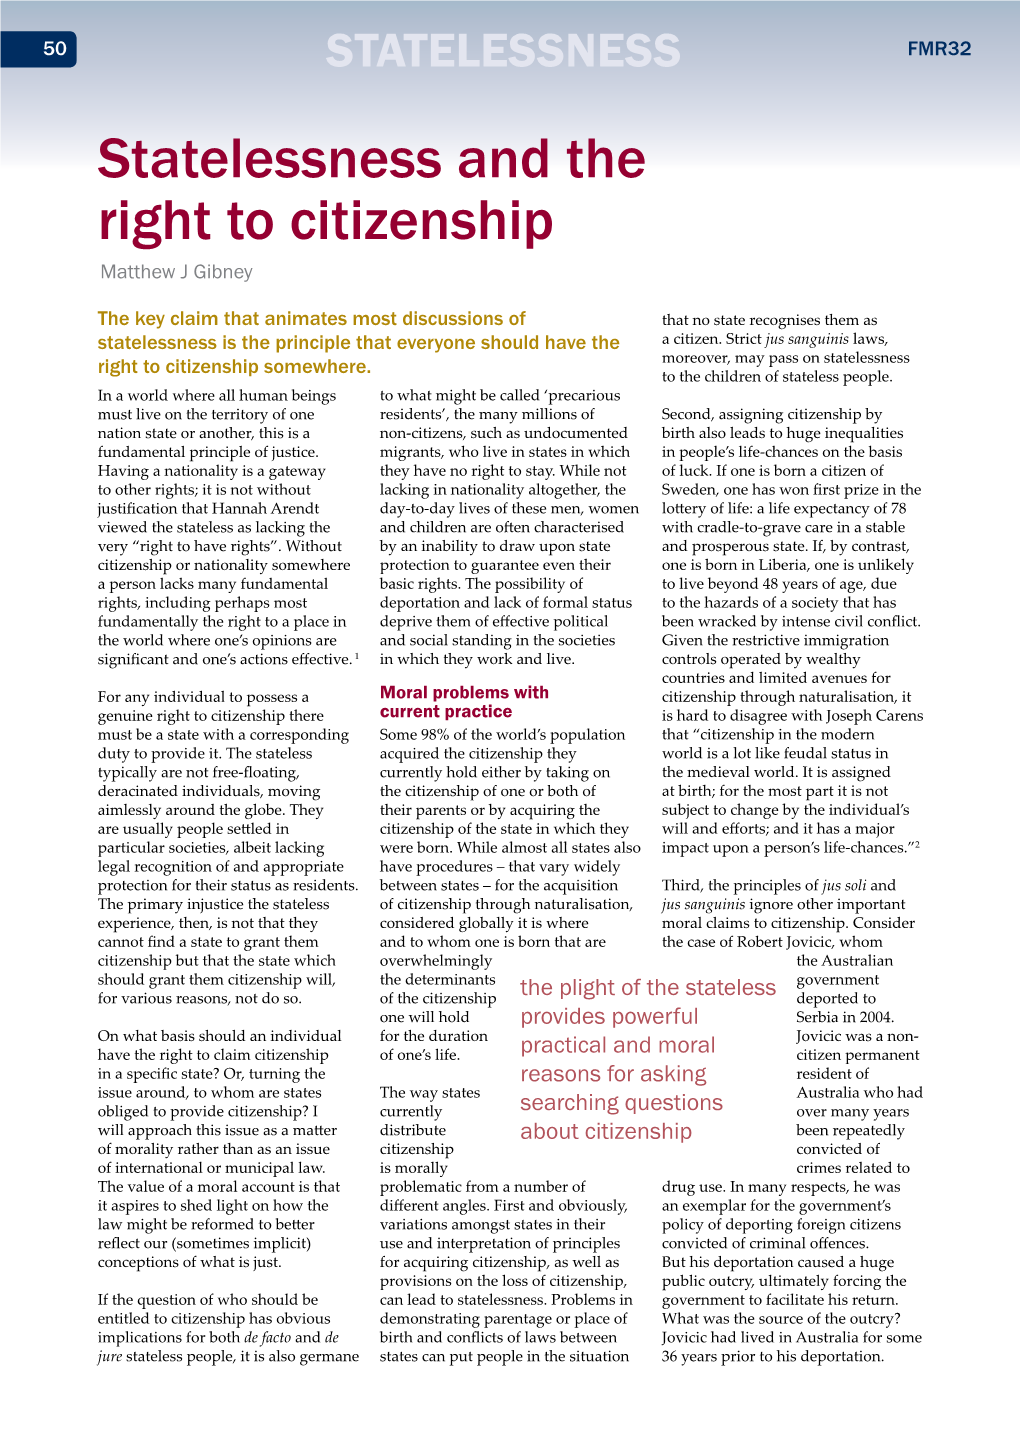 Statelessness and the Right to Citizenship Matthew J Gibney